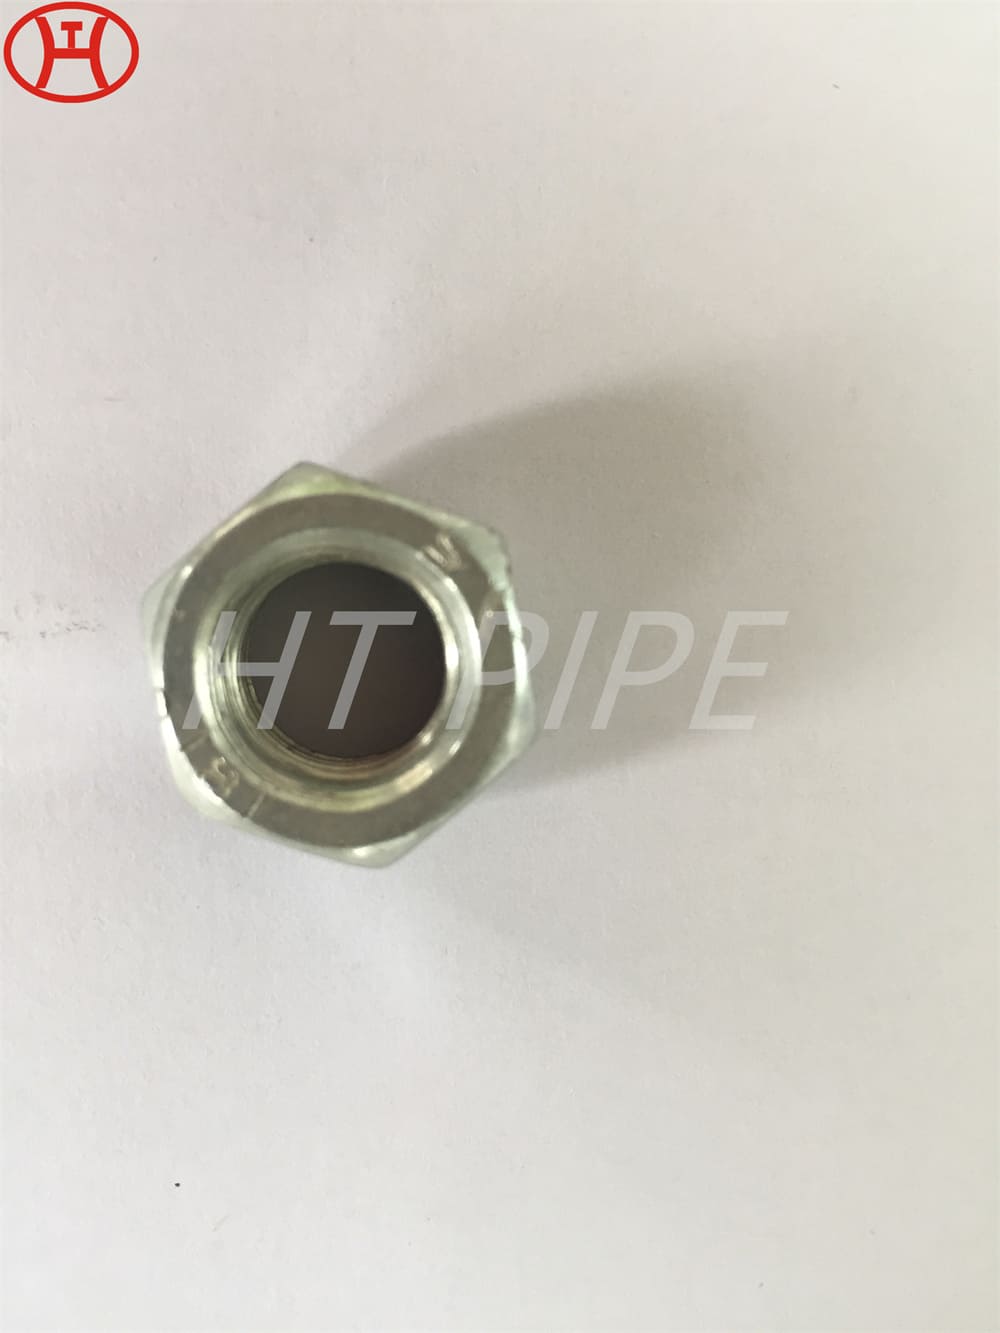 Inconel 718 2.4668 DIN 934 hex nut